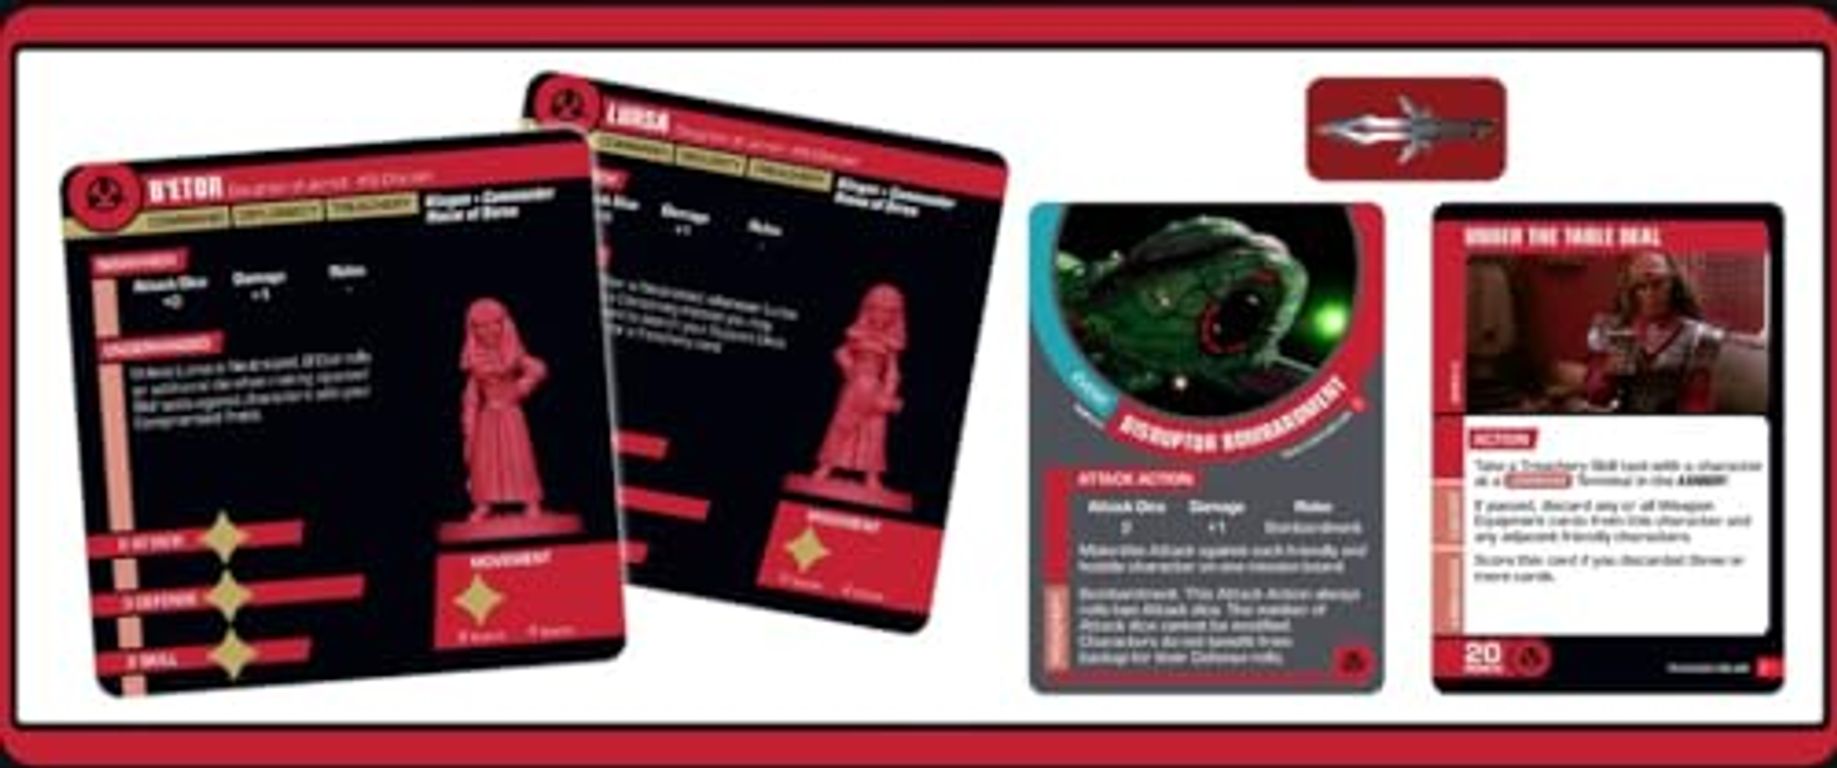 Star Trek: Away Missions – House of Duras: Klingon Expansion cards